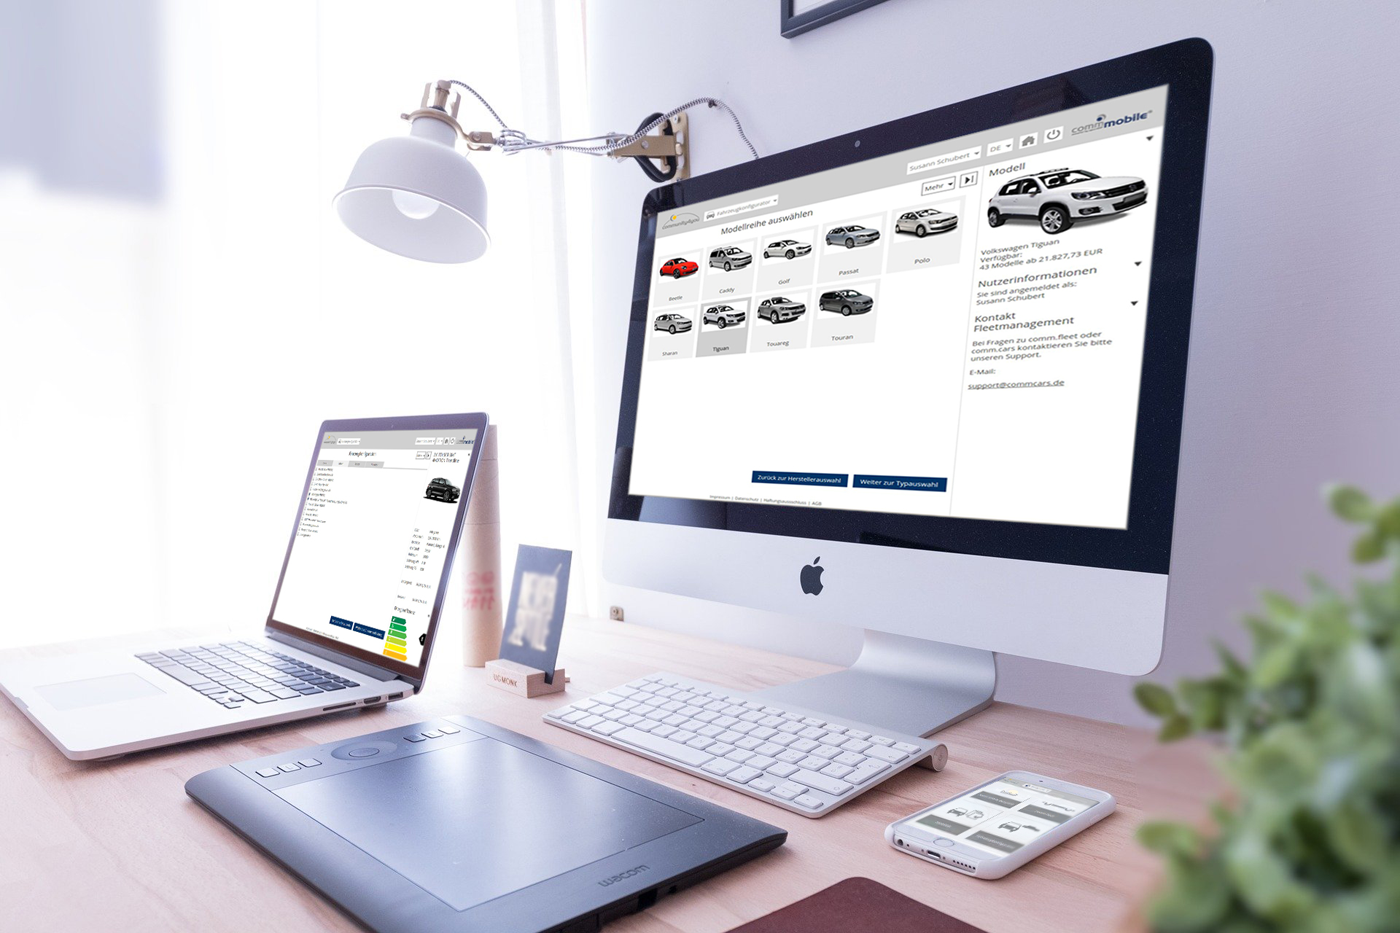 Muldi bidding is a central component of the comm.cars vehicle procurement software